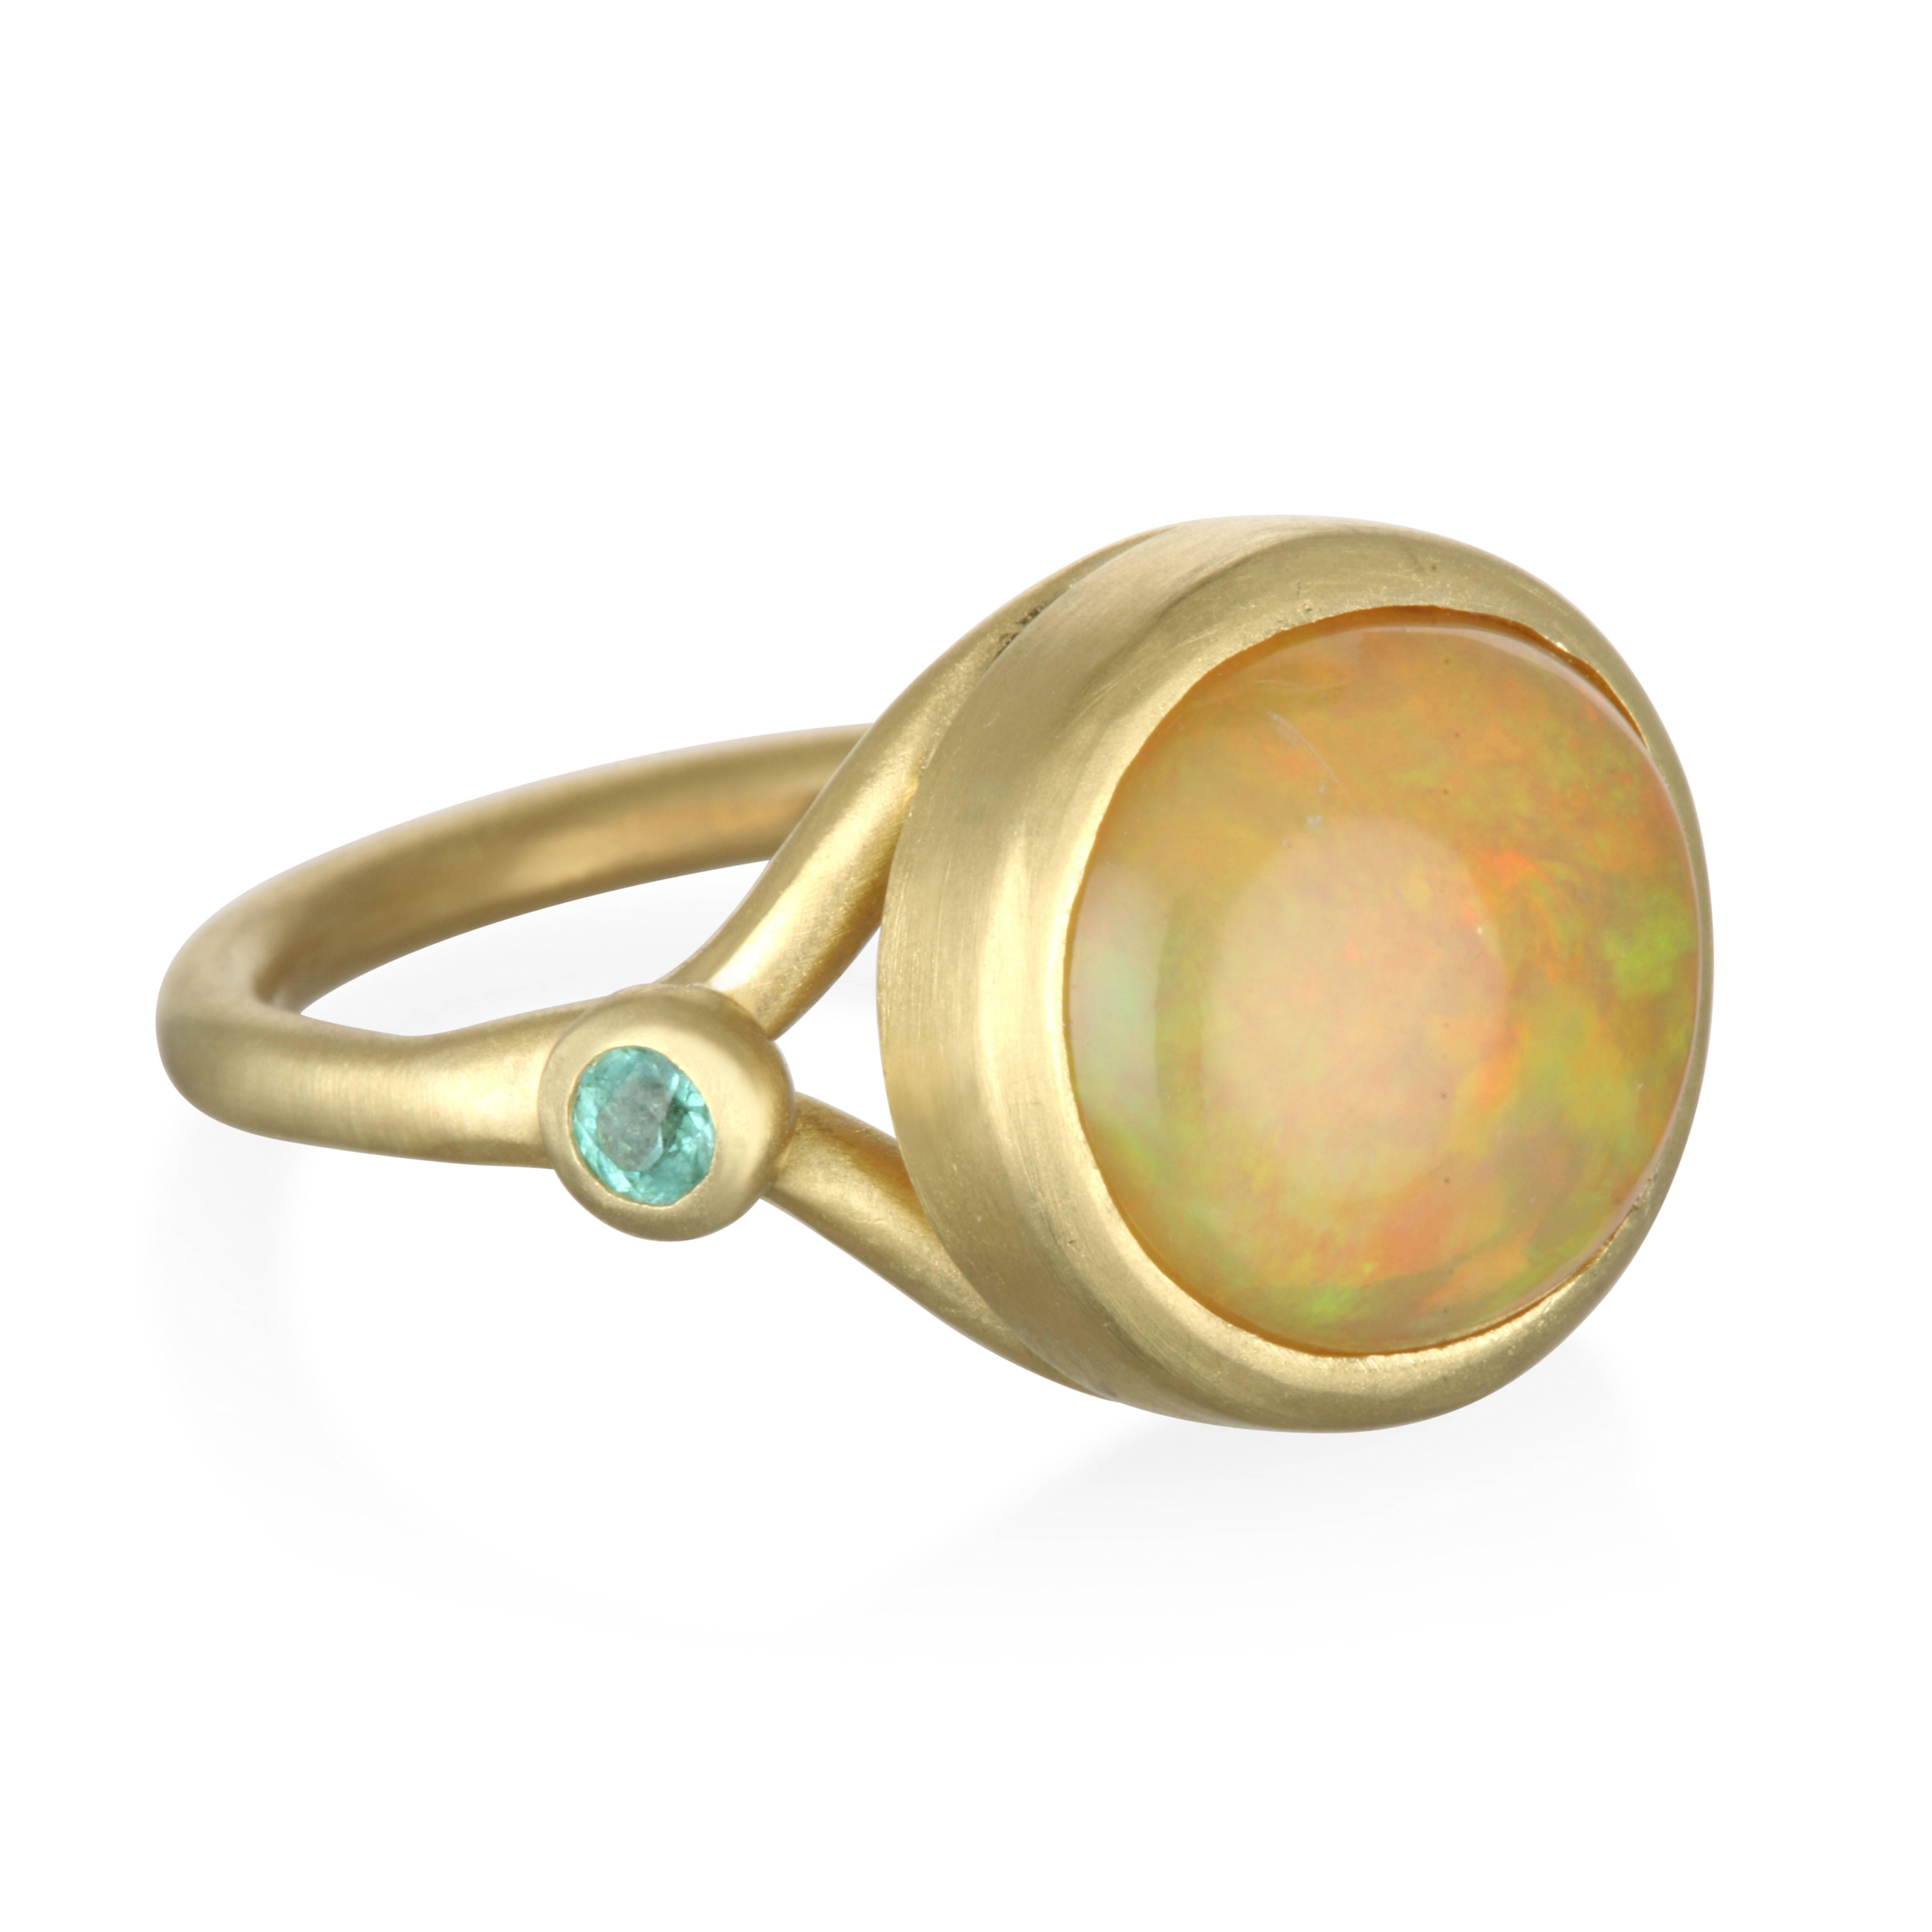 Faye Kim 18k Gold Round Mexican Opal Cabochon and Paraiba Tourmaline Ring.
The beautiful color contrast between the bright blue-green Paraiba tourmalines and the Opal perfectly complements one another in this striking Mexican Opal Cabochon and